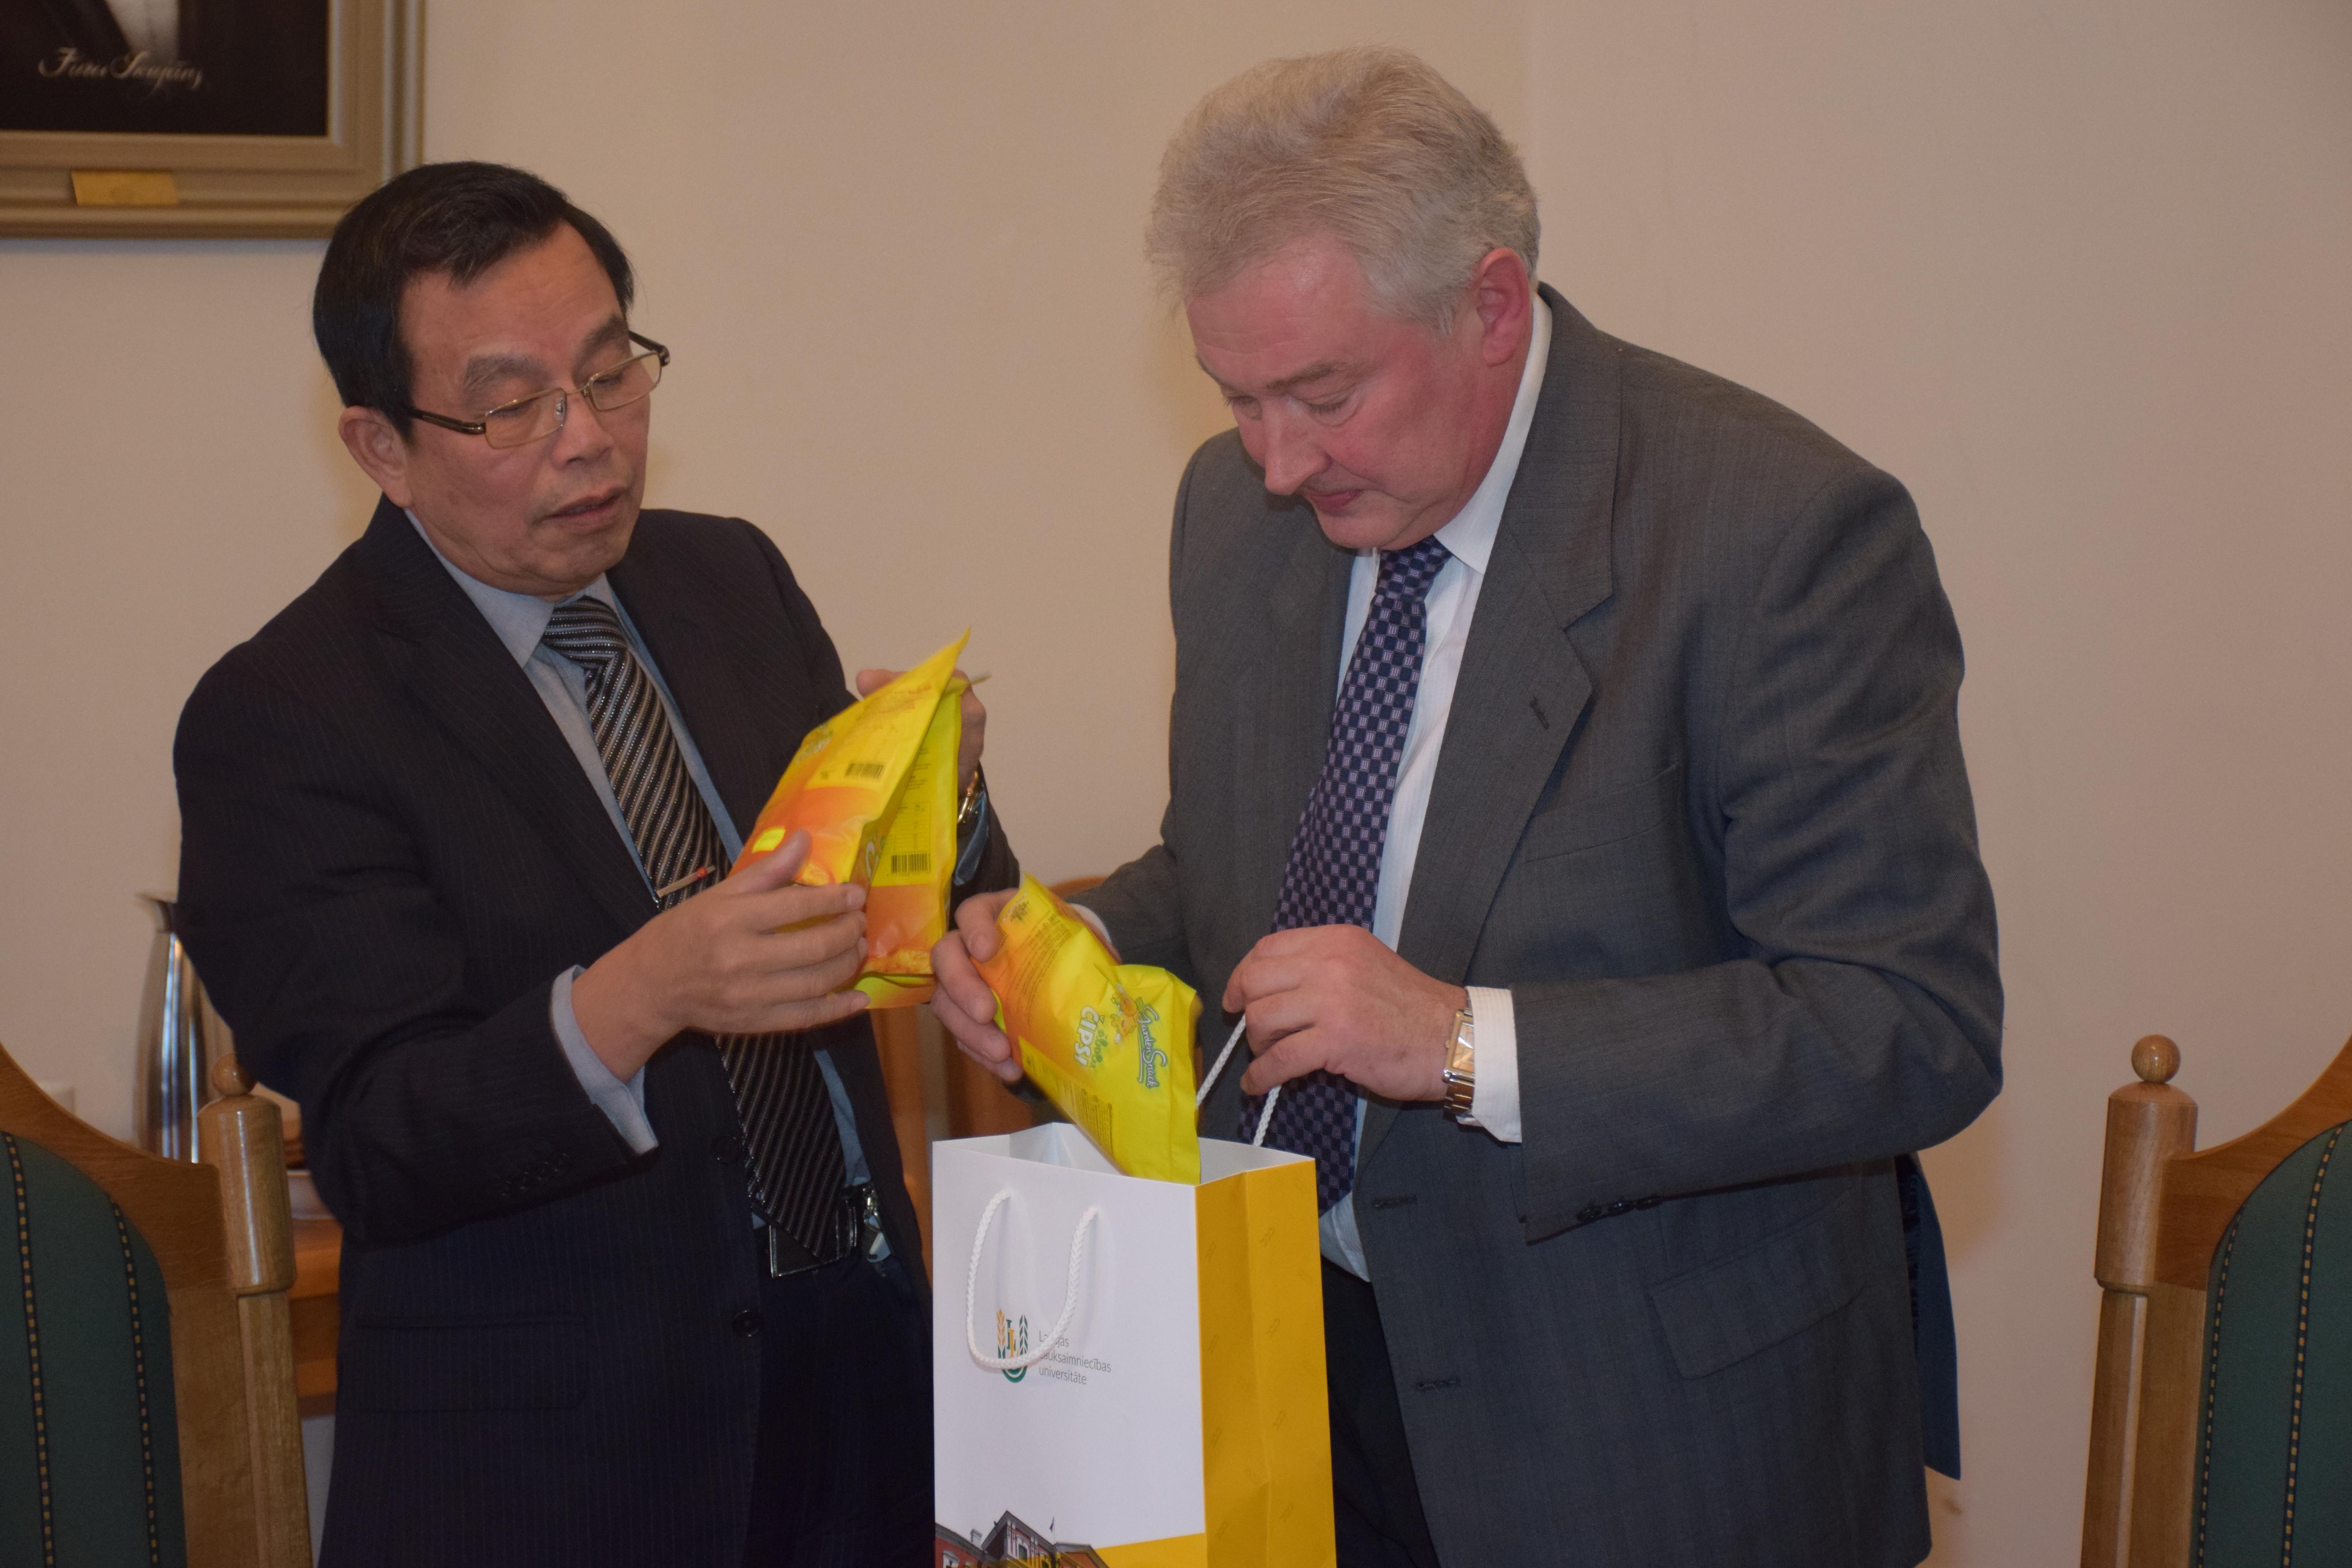 Head of the International Cooperation Center of Latvia University of Agriculture Mr. Voldemars Bariss introduced the dried fruit snacks developed and produced by Faculty of Food Technology to Head of the Taipei Mission in the Republic of Latvia Mr. Rong-Chuan Wu.